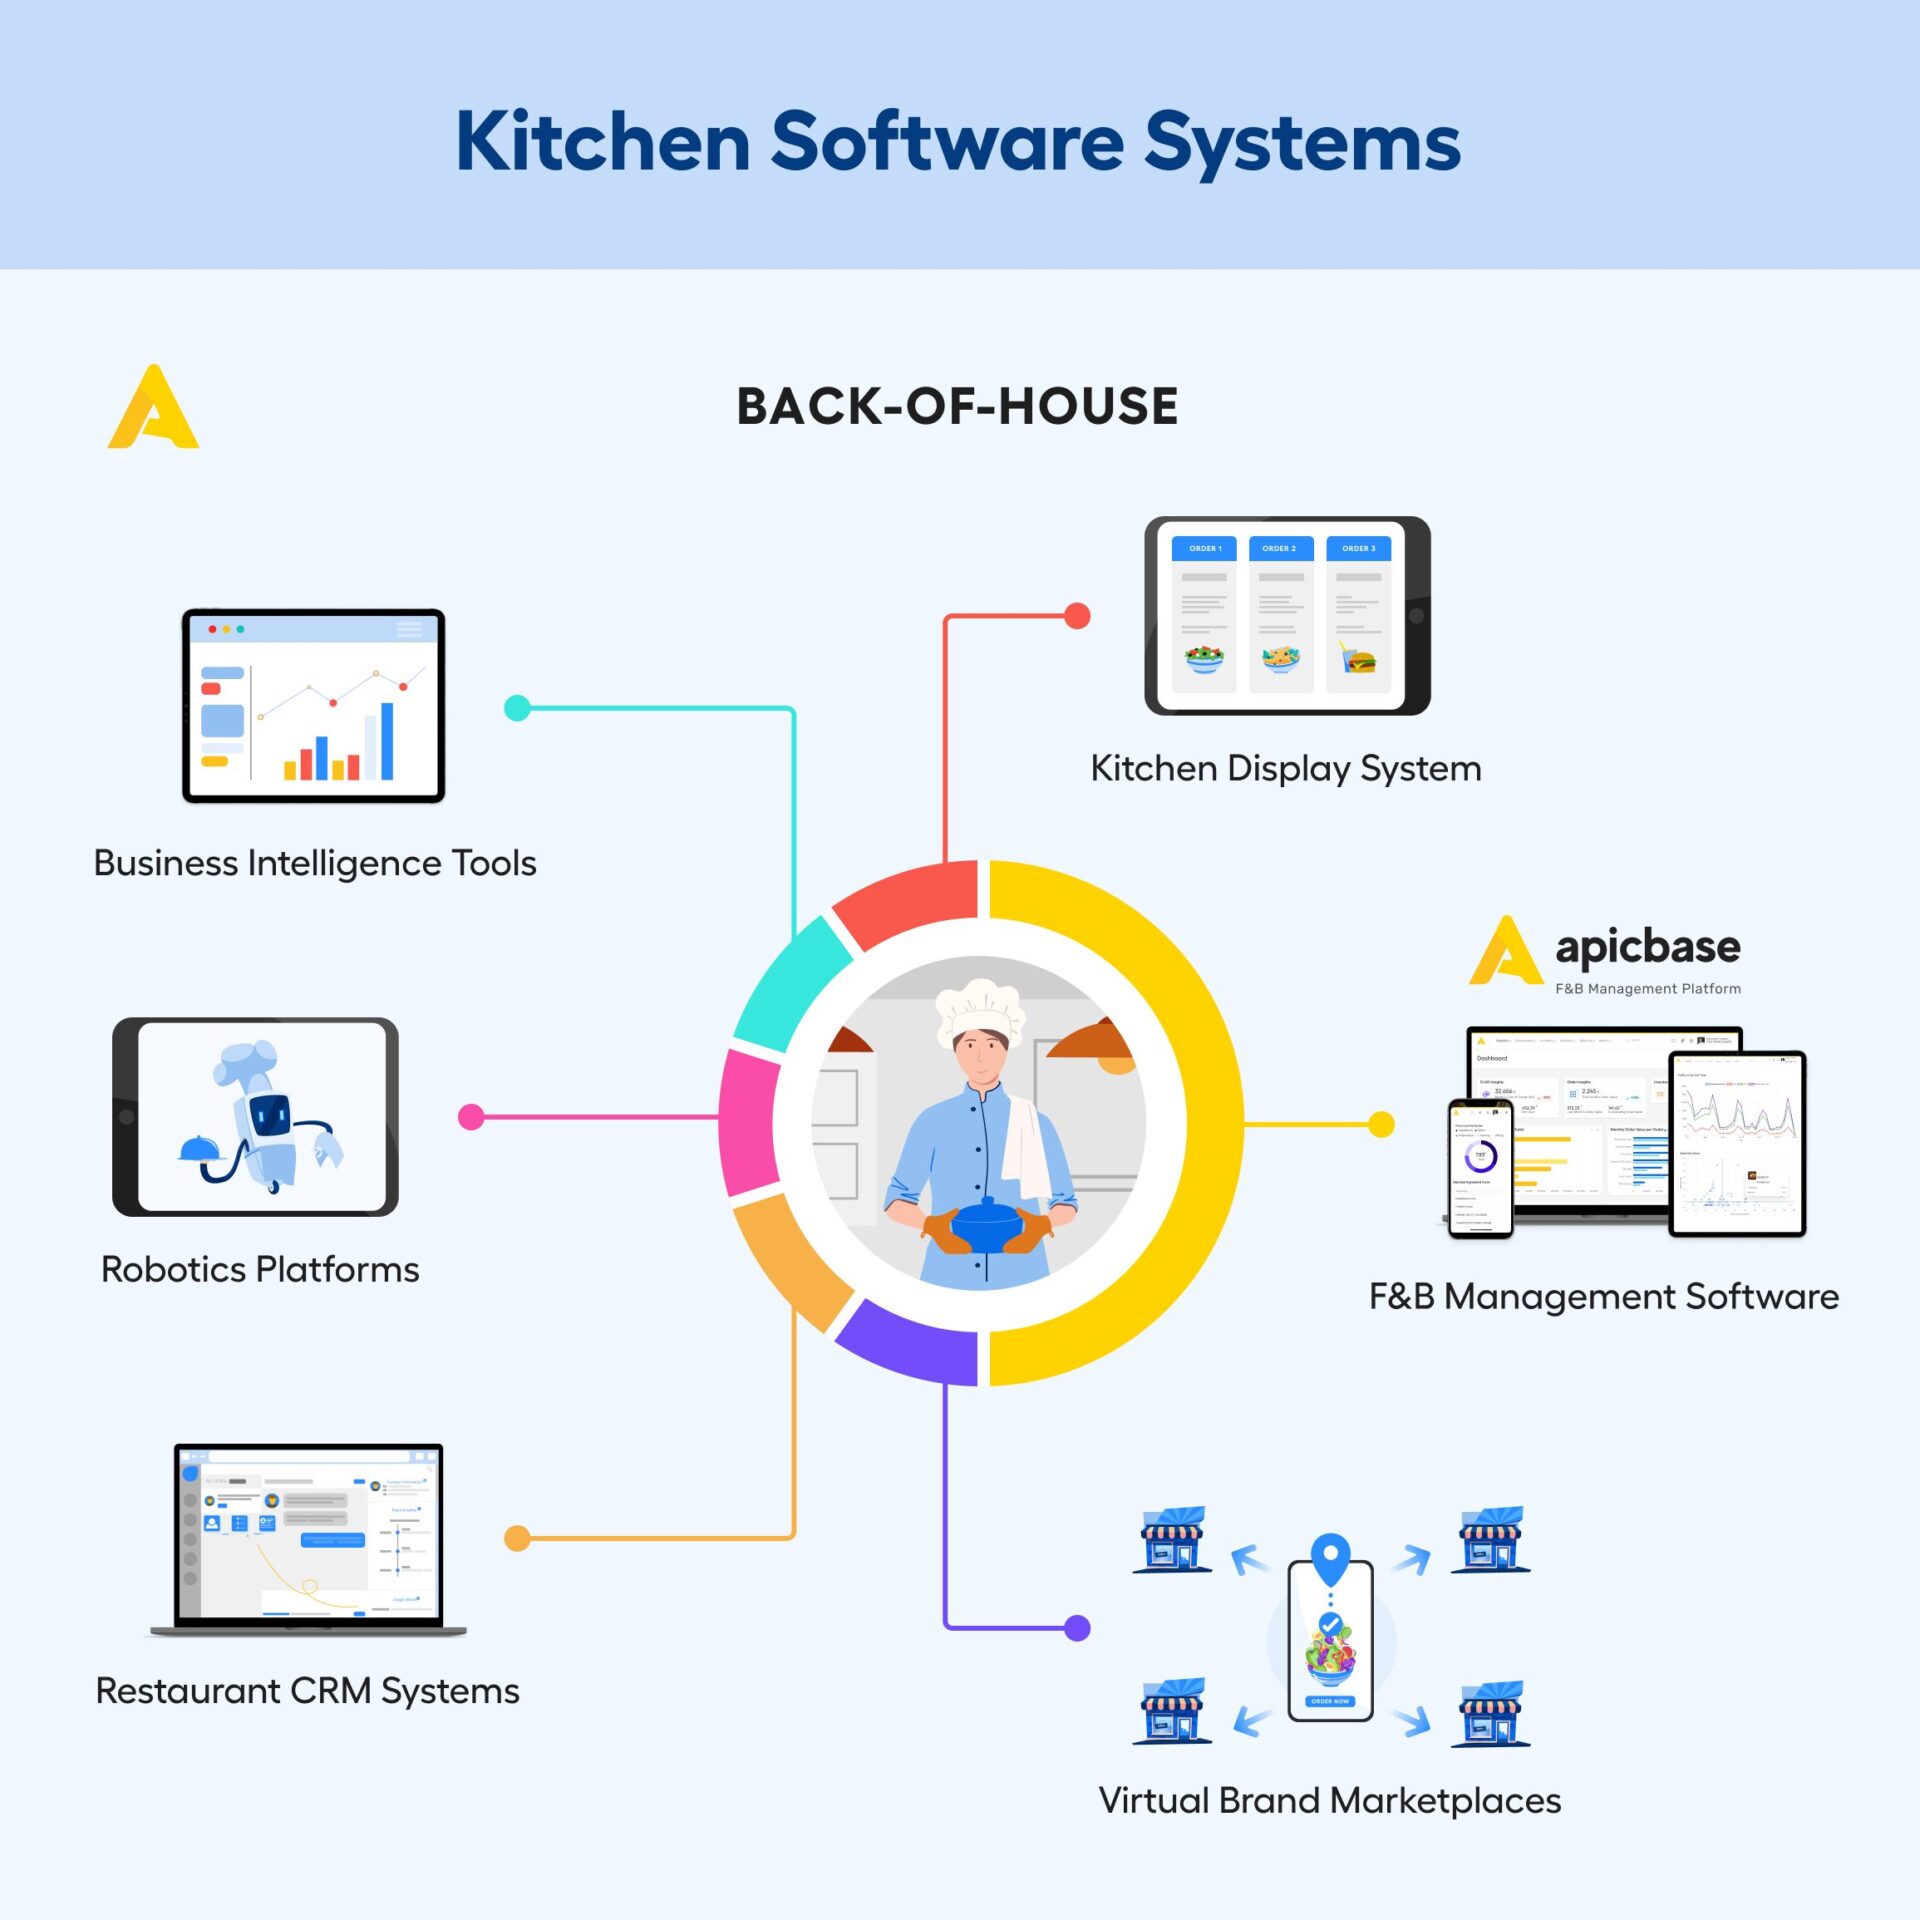 Kitchen Software - Back-of-house